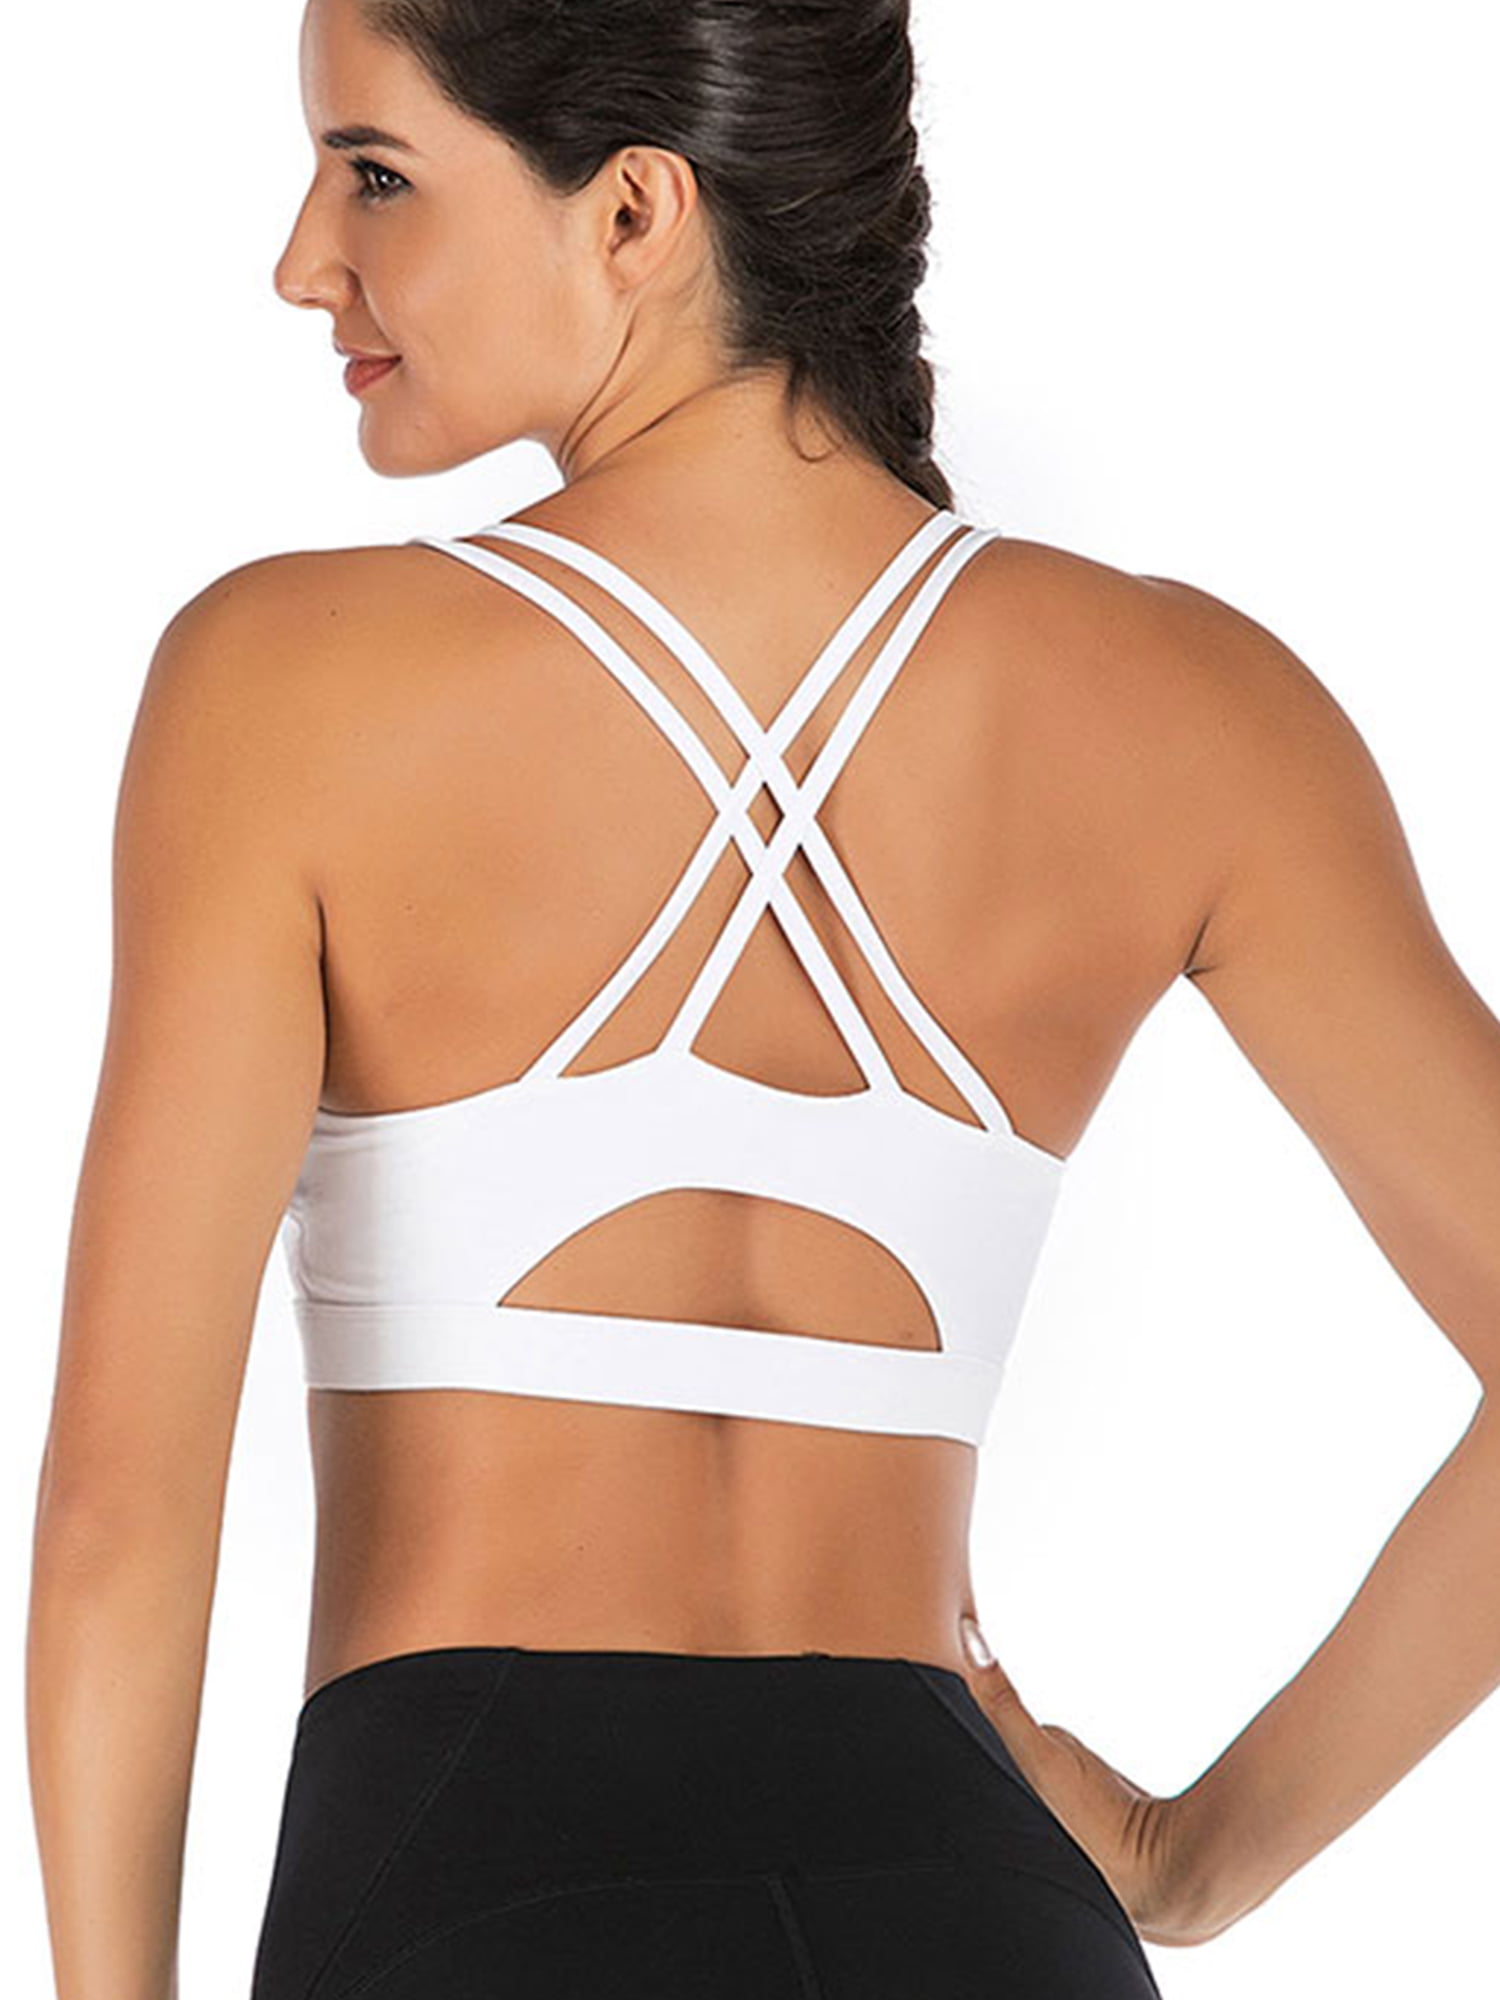 Women Yoga Cami Sports Bra Padded Strappy Bralettes Cropped Workout Top Backless 